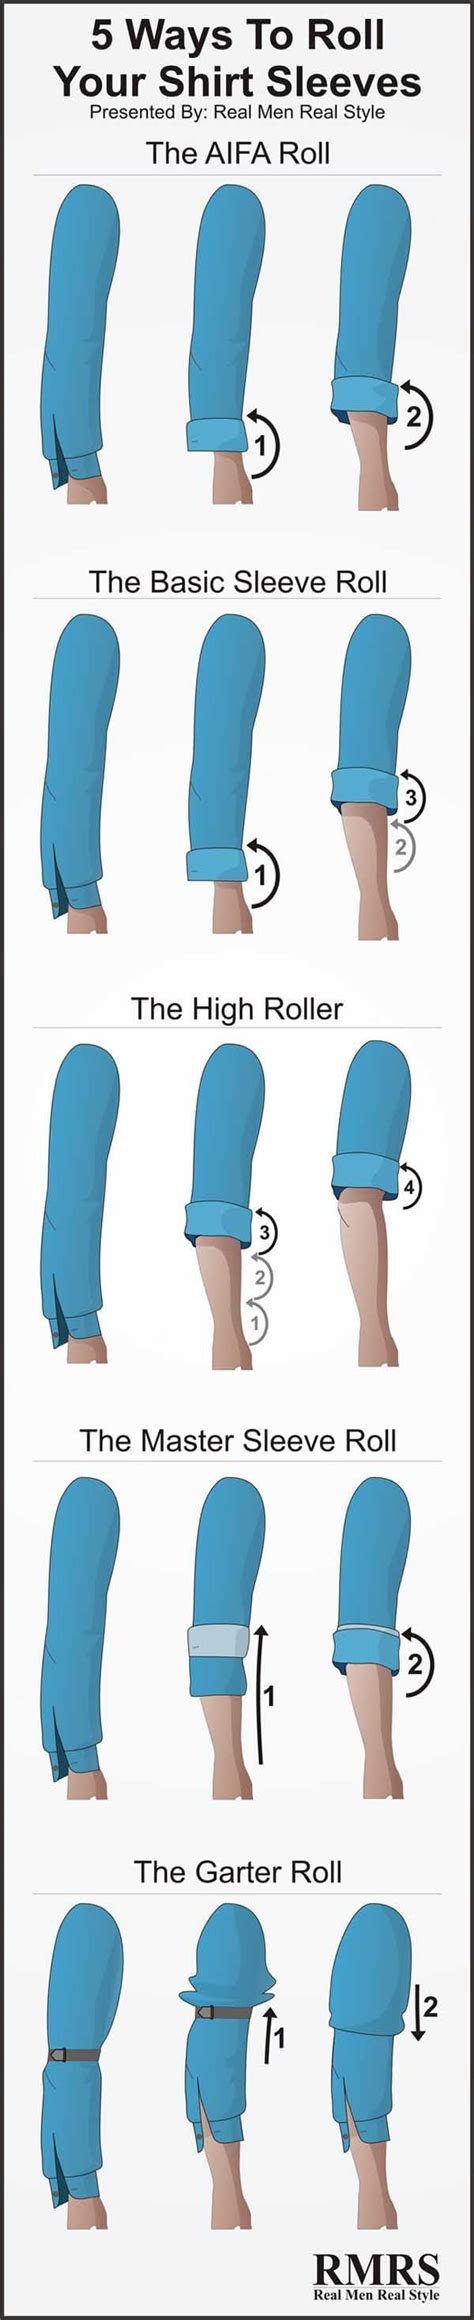 How To Roll Shirt Sleeves 5 Ways To Fold Your Shirt Sleeves Sleeve